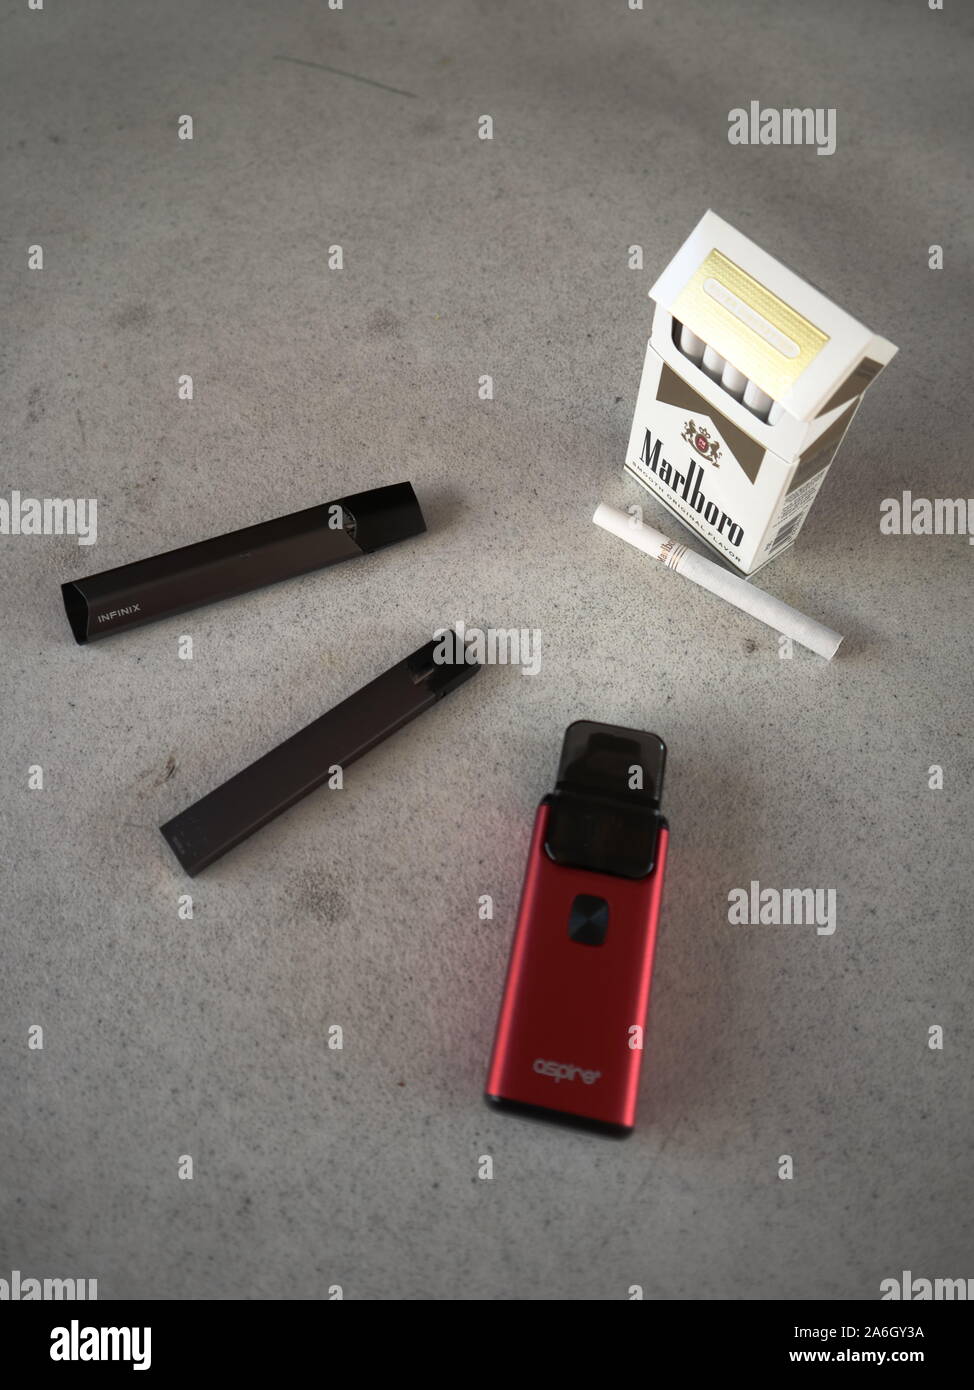 3 vapes juul, aspire breeze, smok infinix with a pack of marlboro cigarettes and one cigarette placed outside on a white textured table, isolated Stock Photo